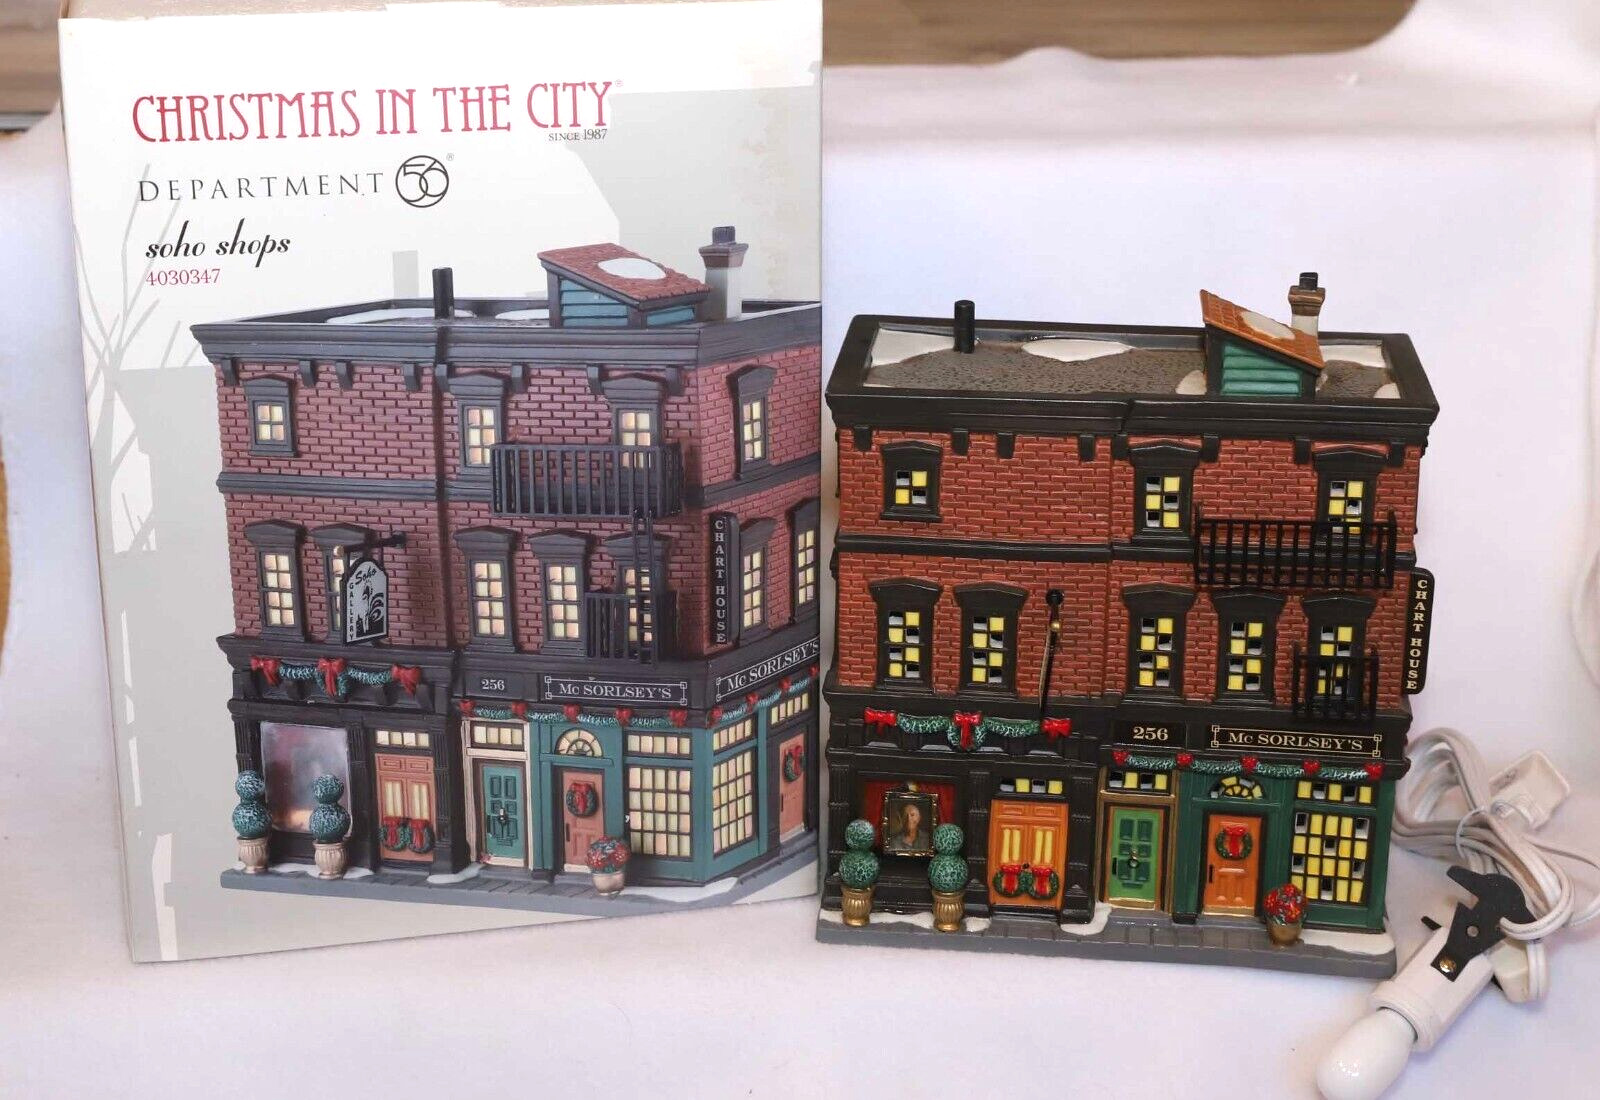 DEPT 56 SOHO SHOPS 4030347 CHRISTMAS IN THE CITY CIC